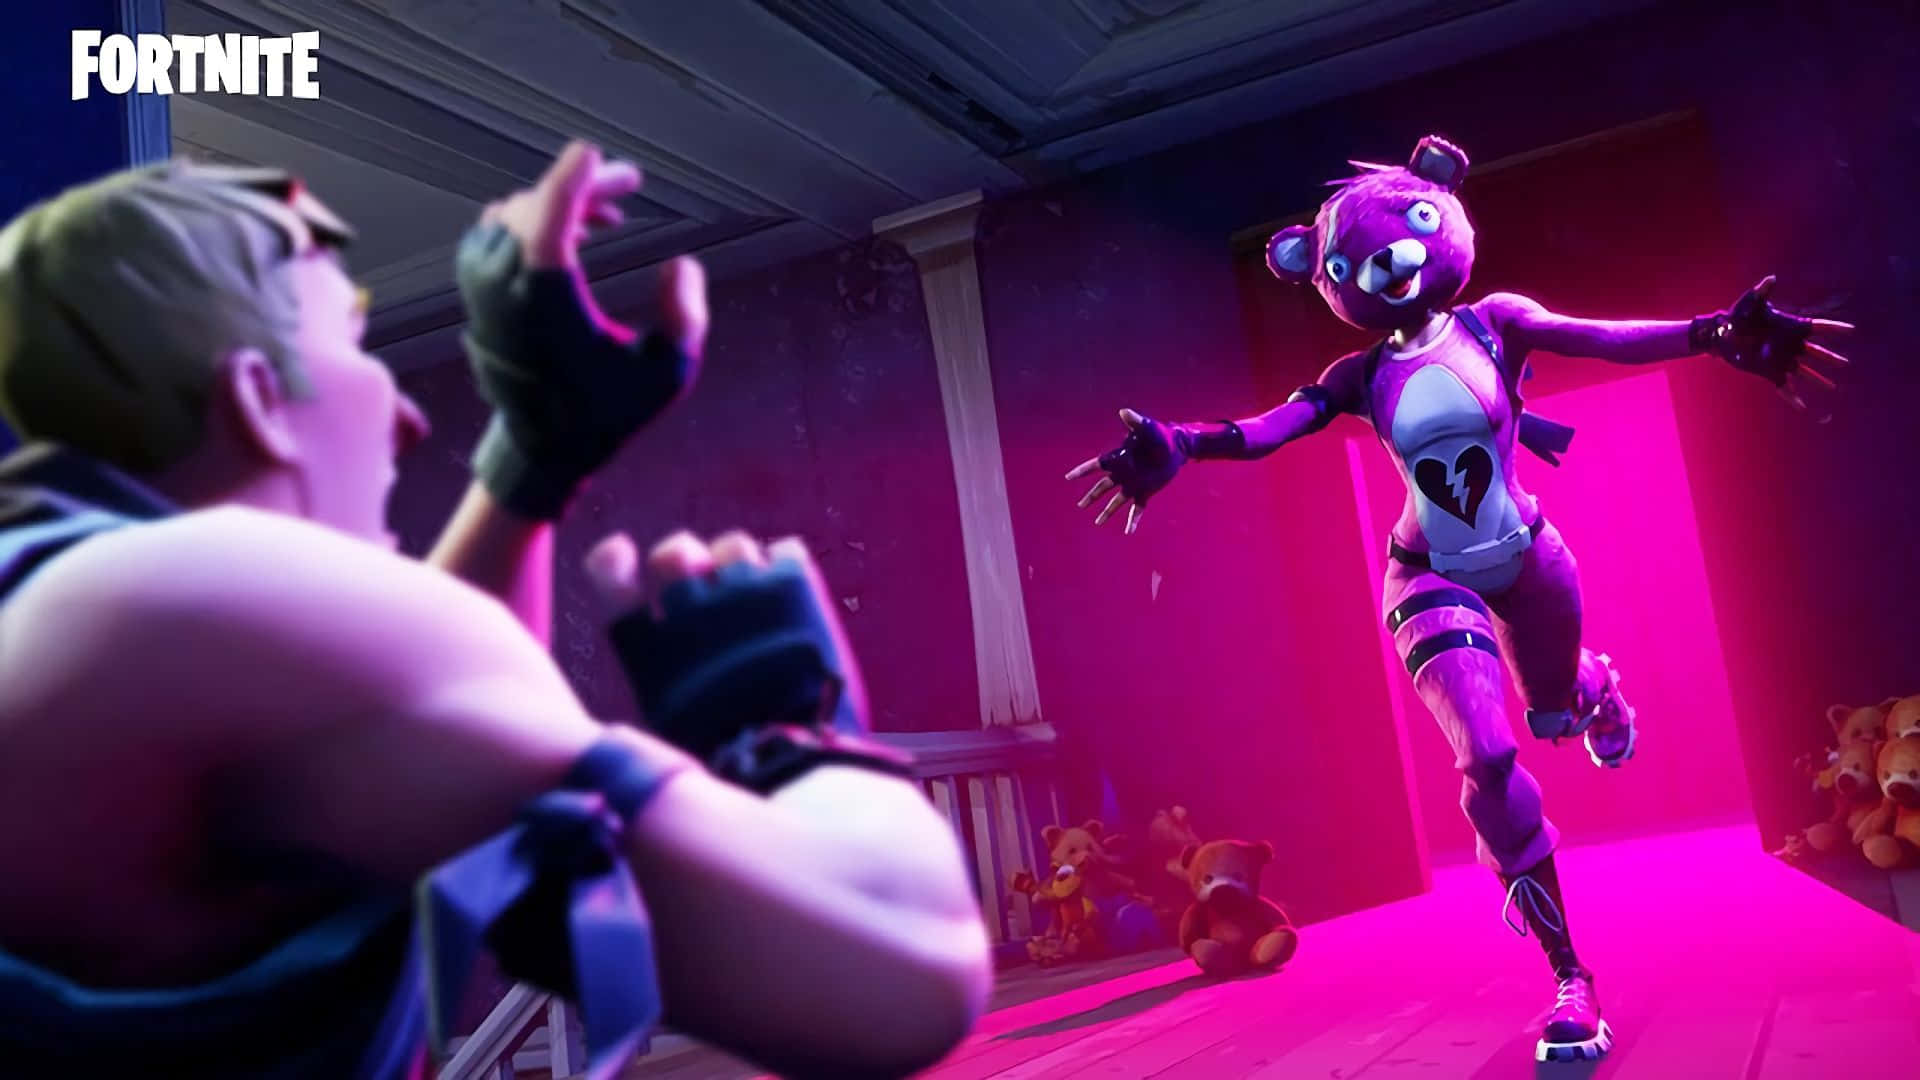 Get ready to blow your enemies away on Fortnite's PC version Wallpaper